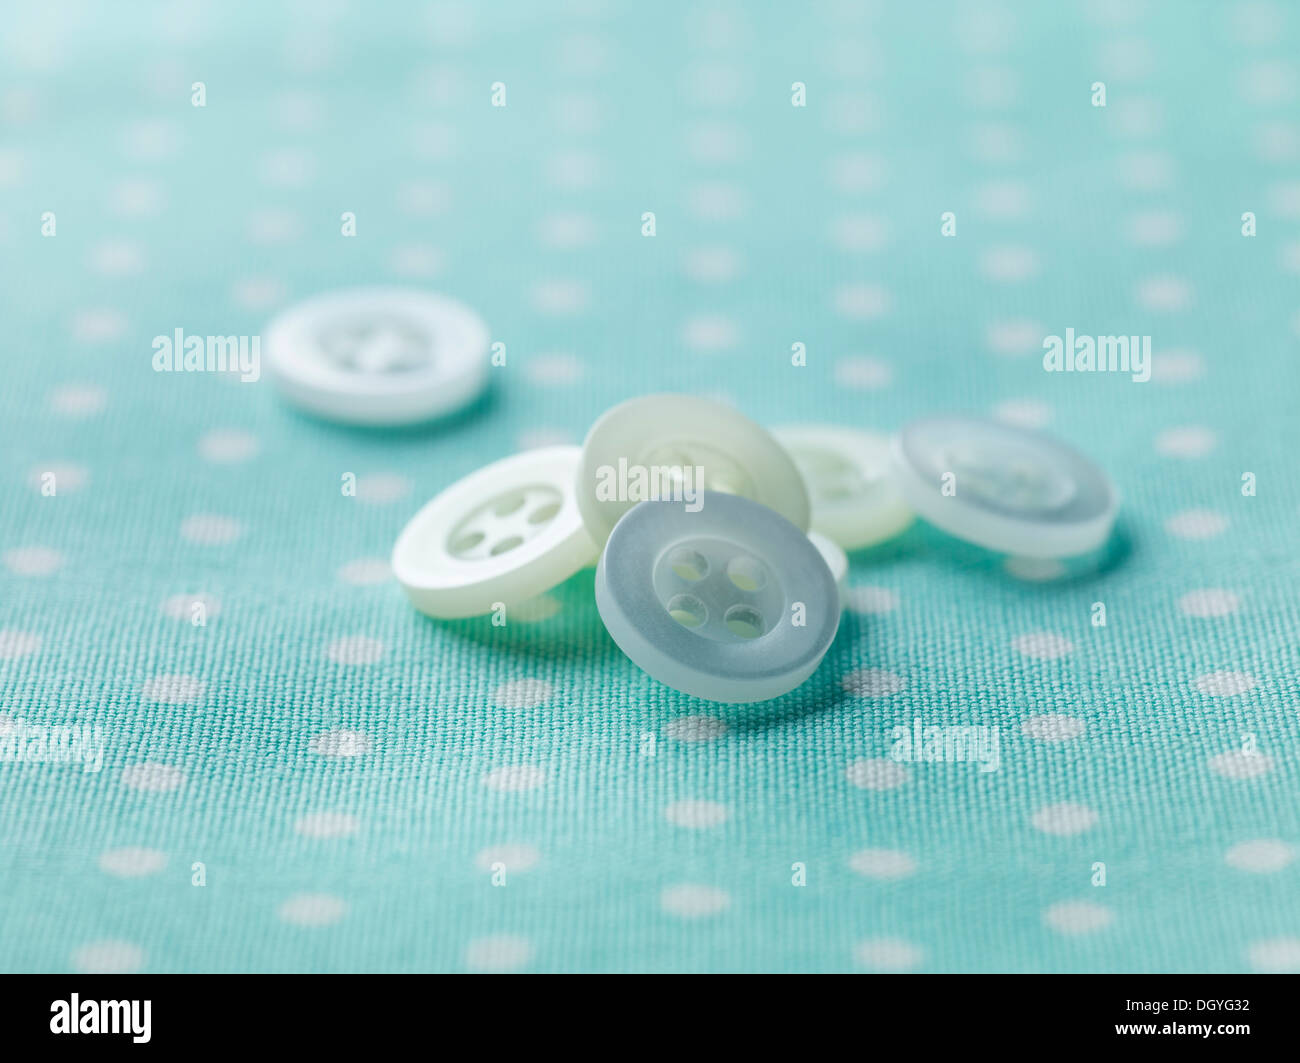 A pile of white buttons on patterned fabric Stock Photo